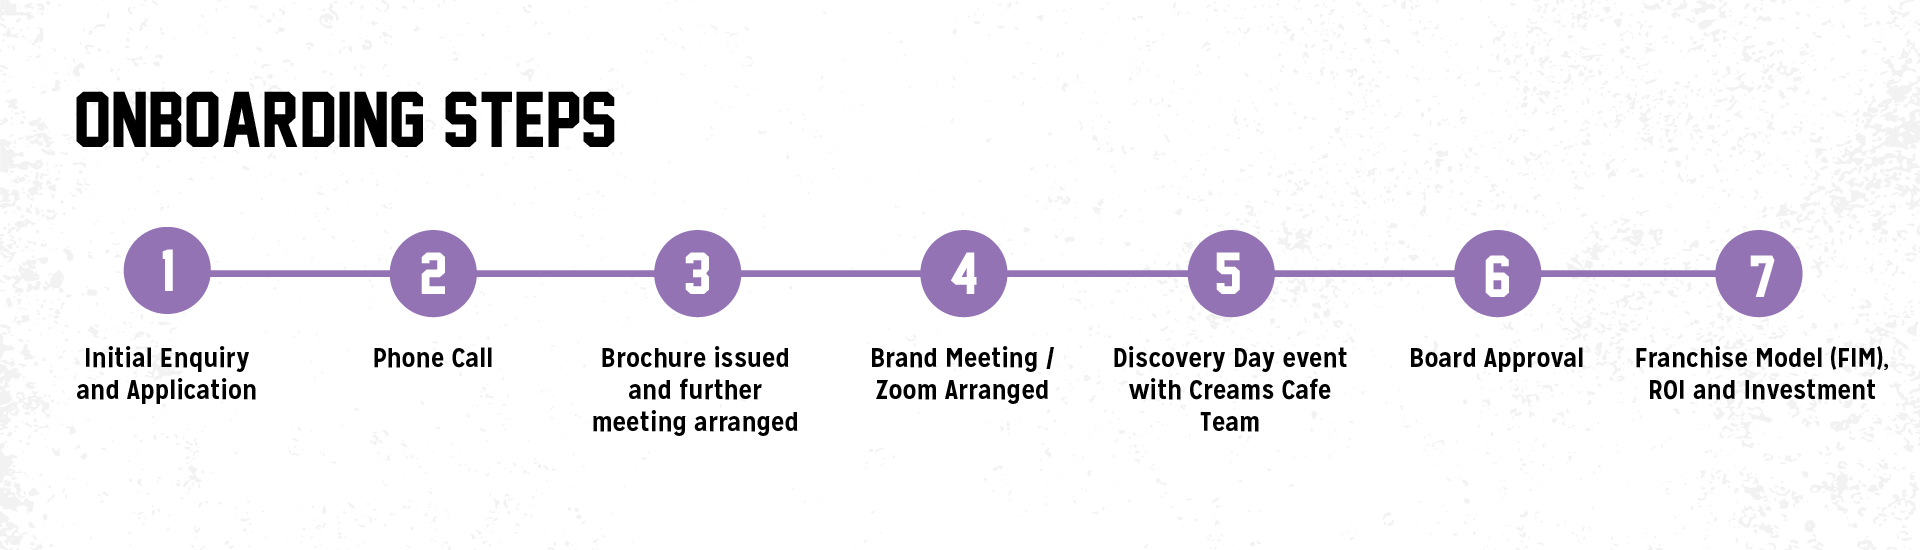 Our onboarding process